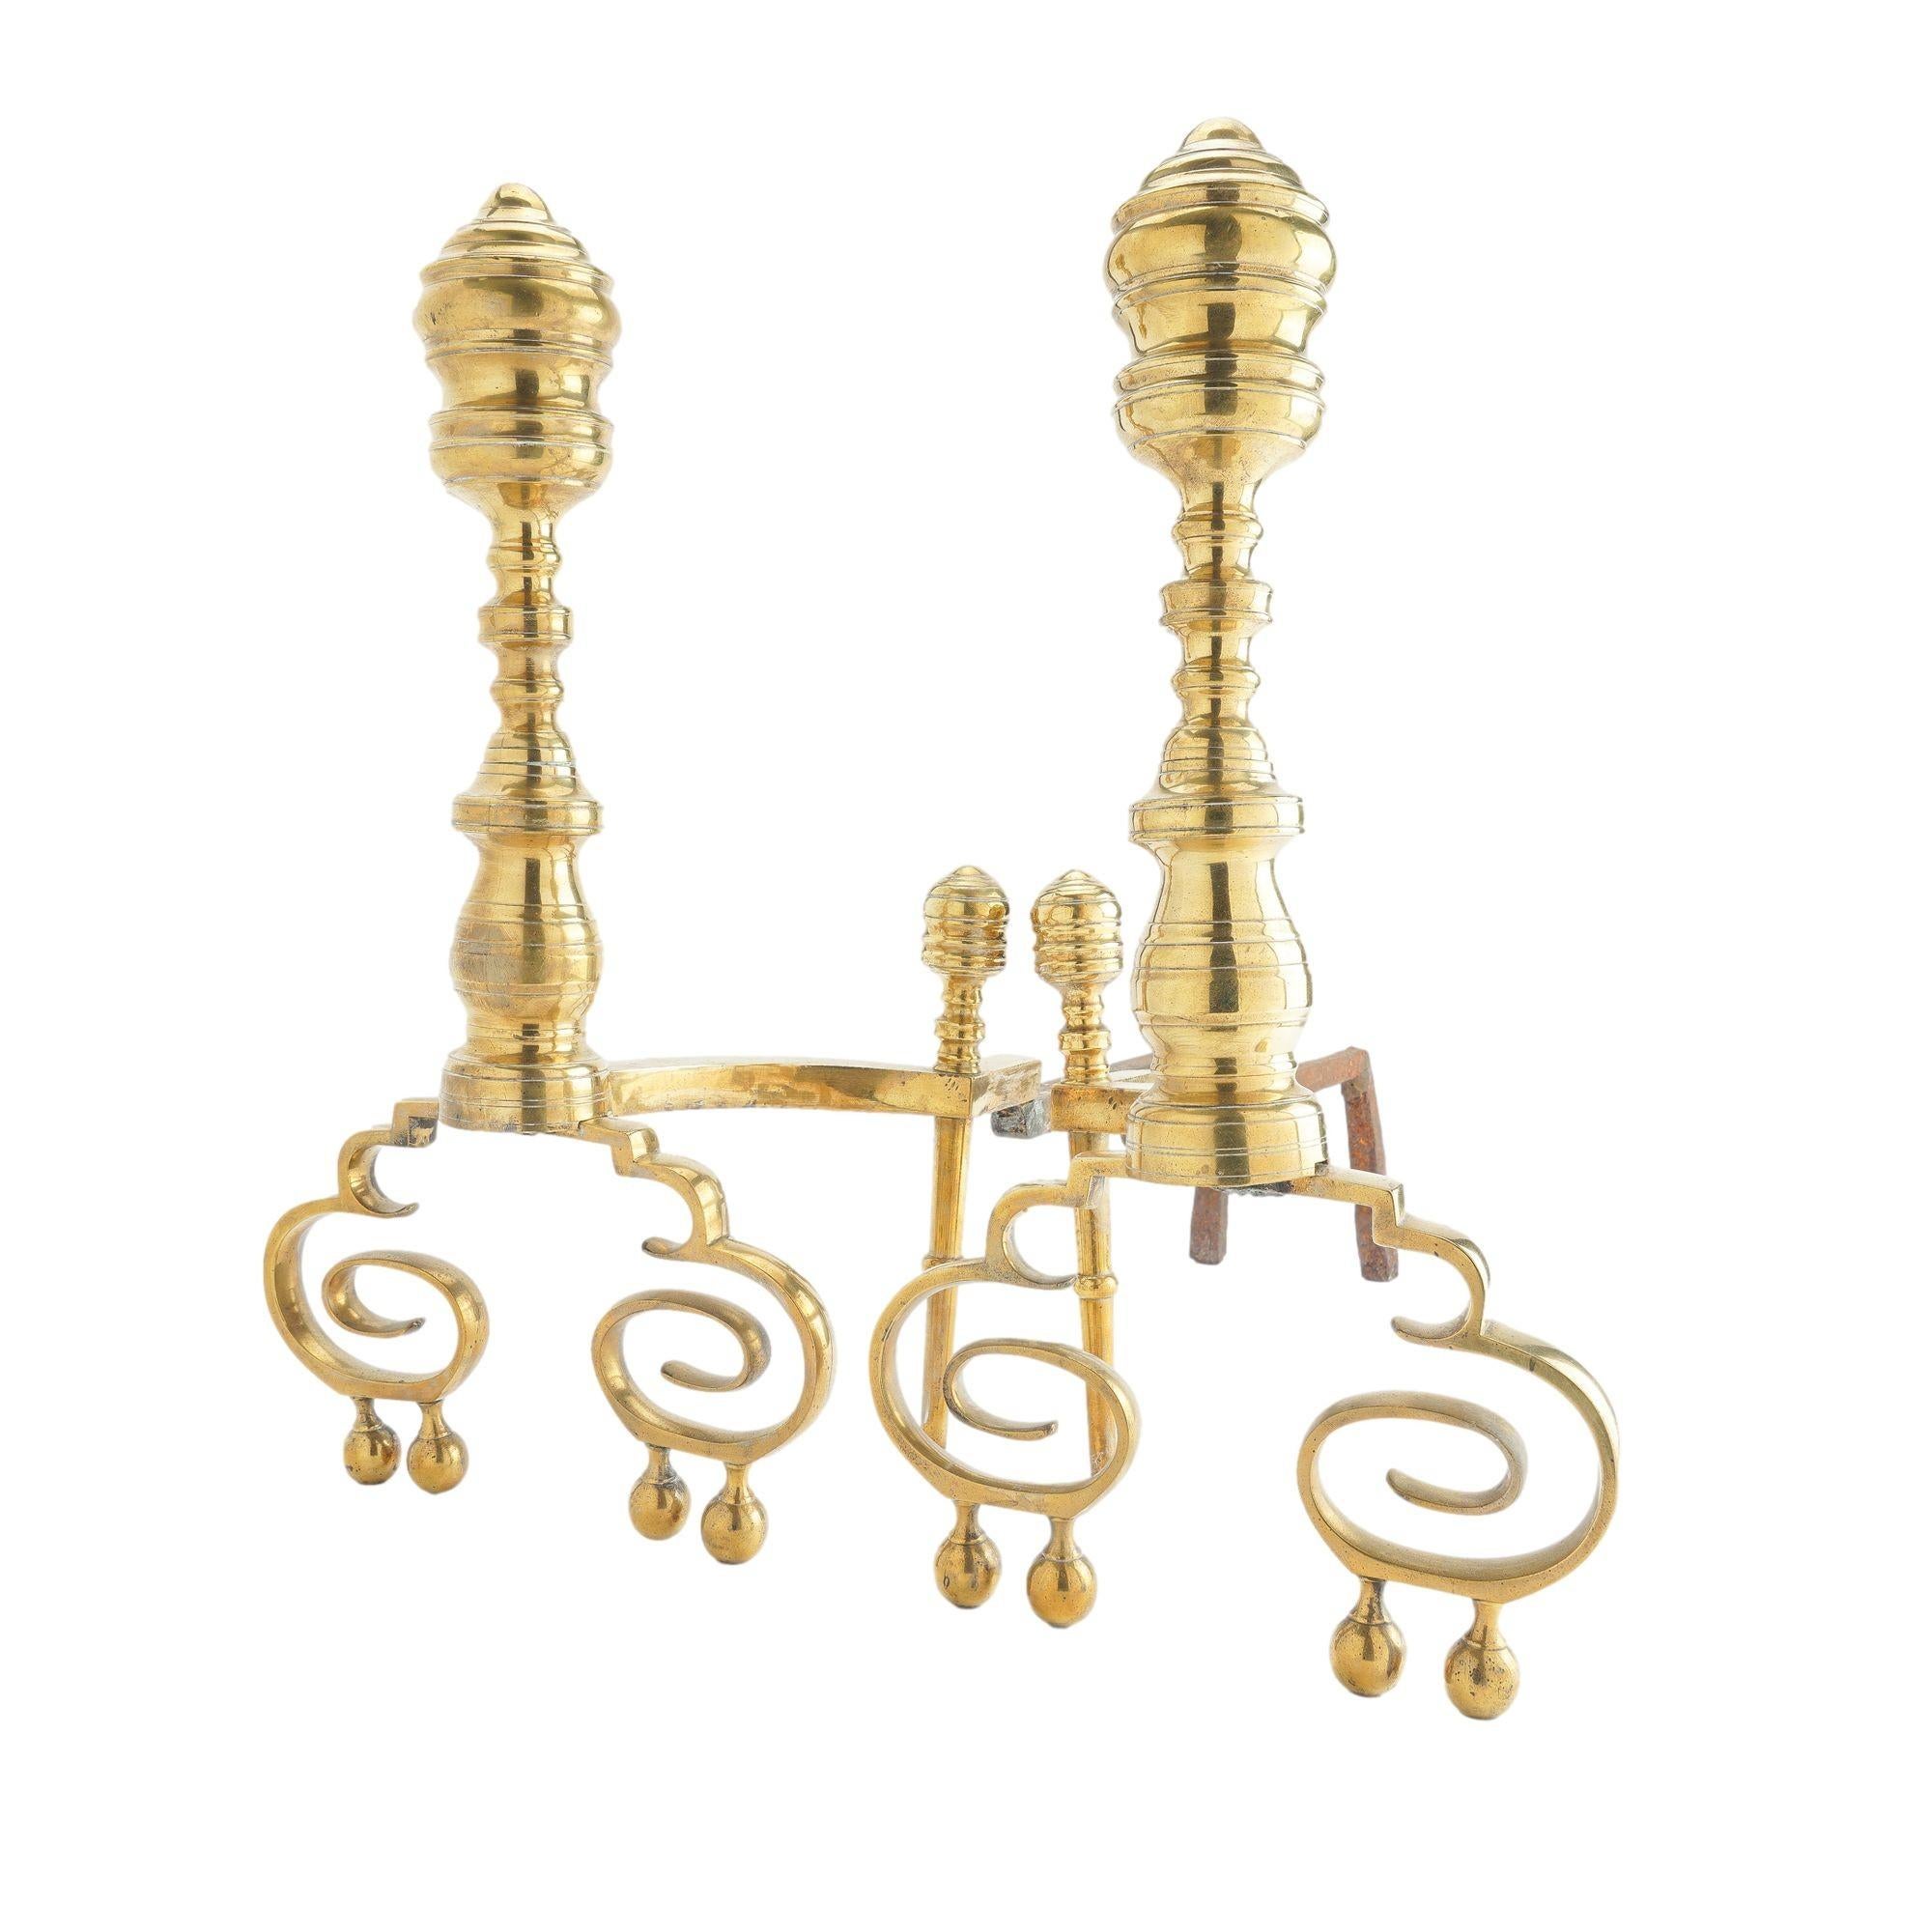 American Pair of Philadelphia Neoclassic brass andirons with fire tools, c. 1815-25